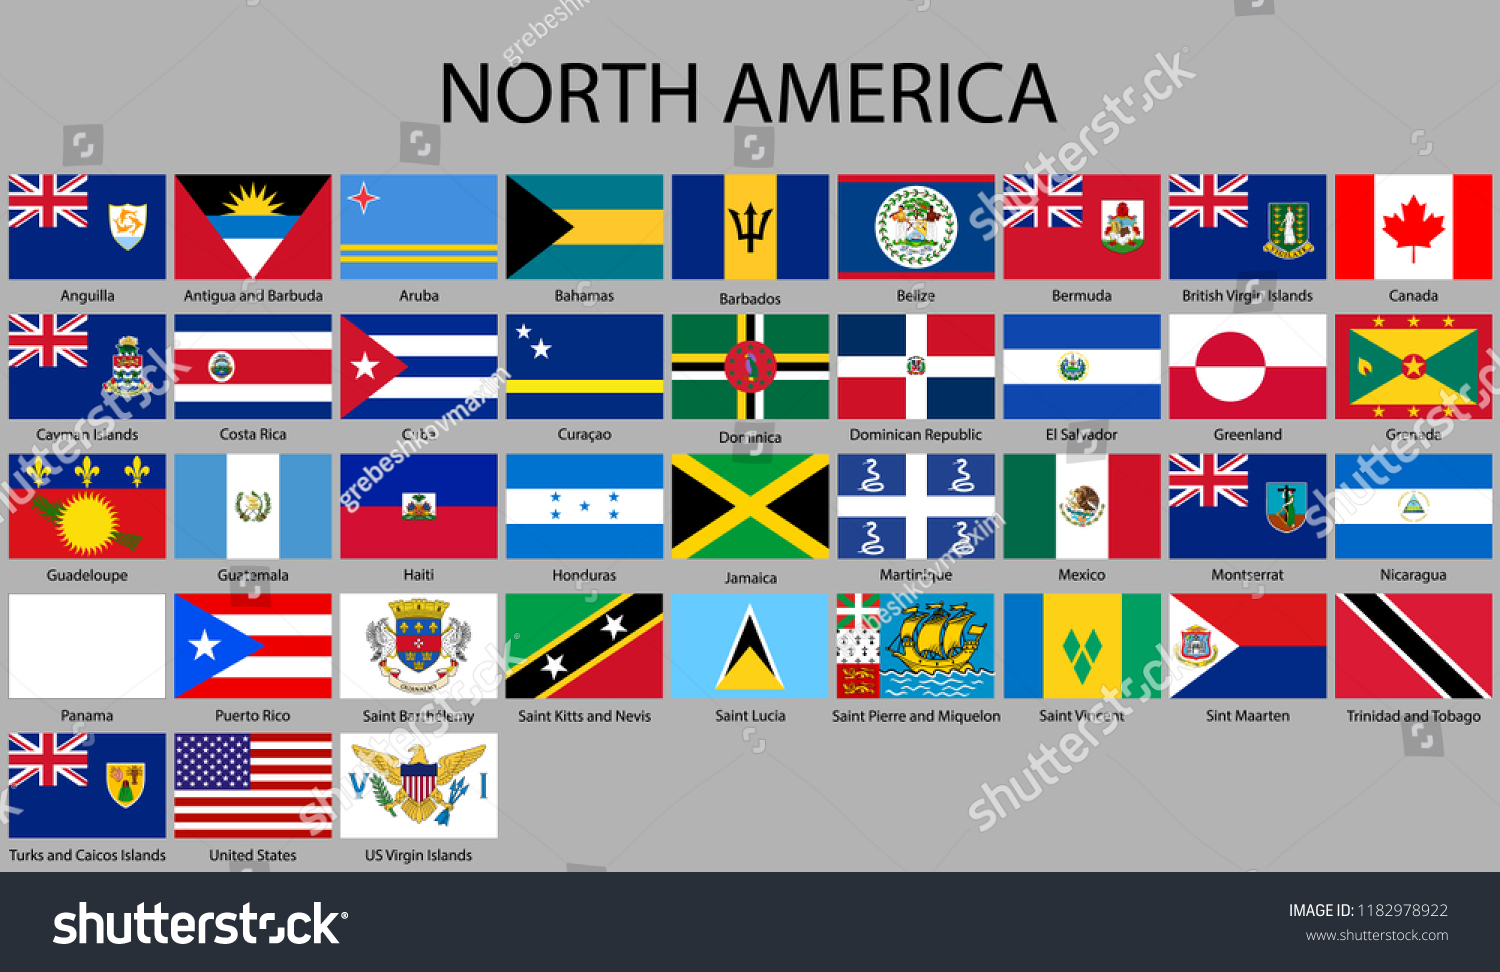 All Flags North America Vector Illustration Stock Vector (Royalty Free ...